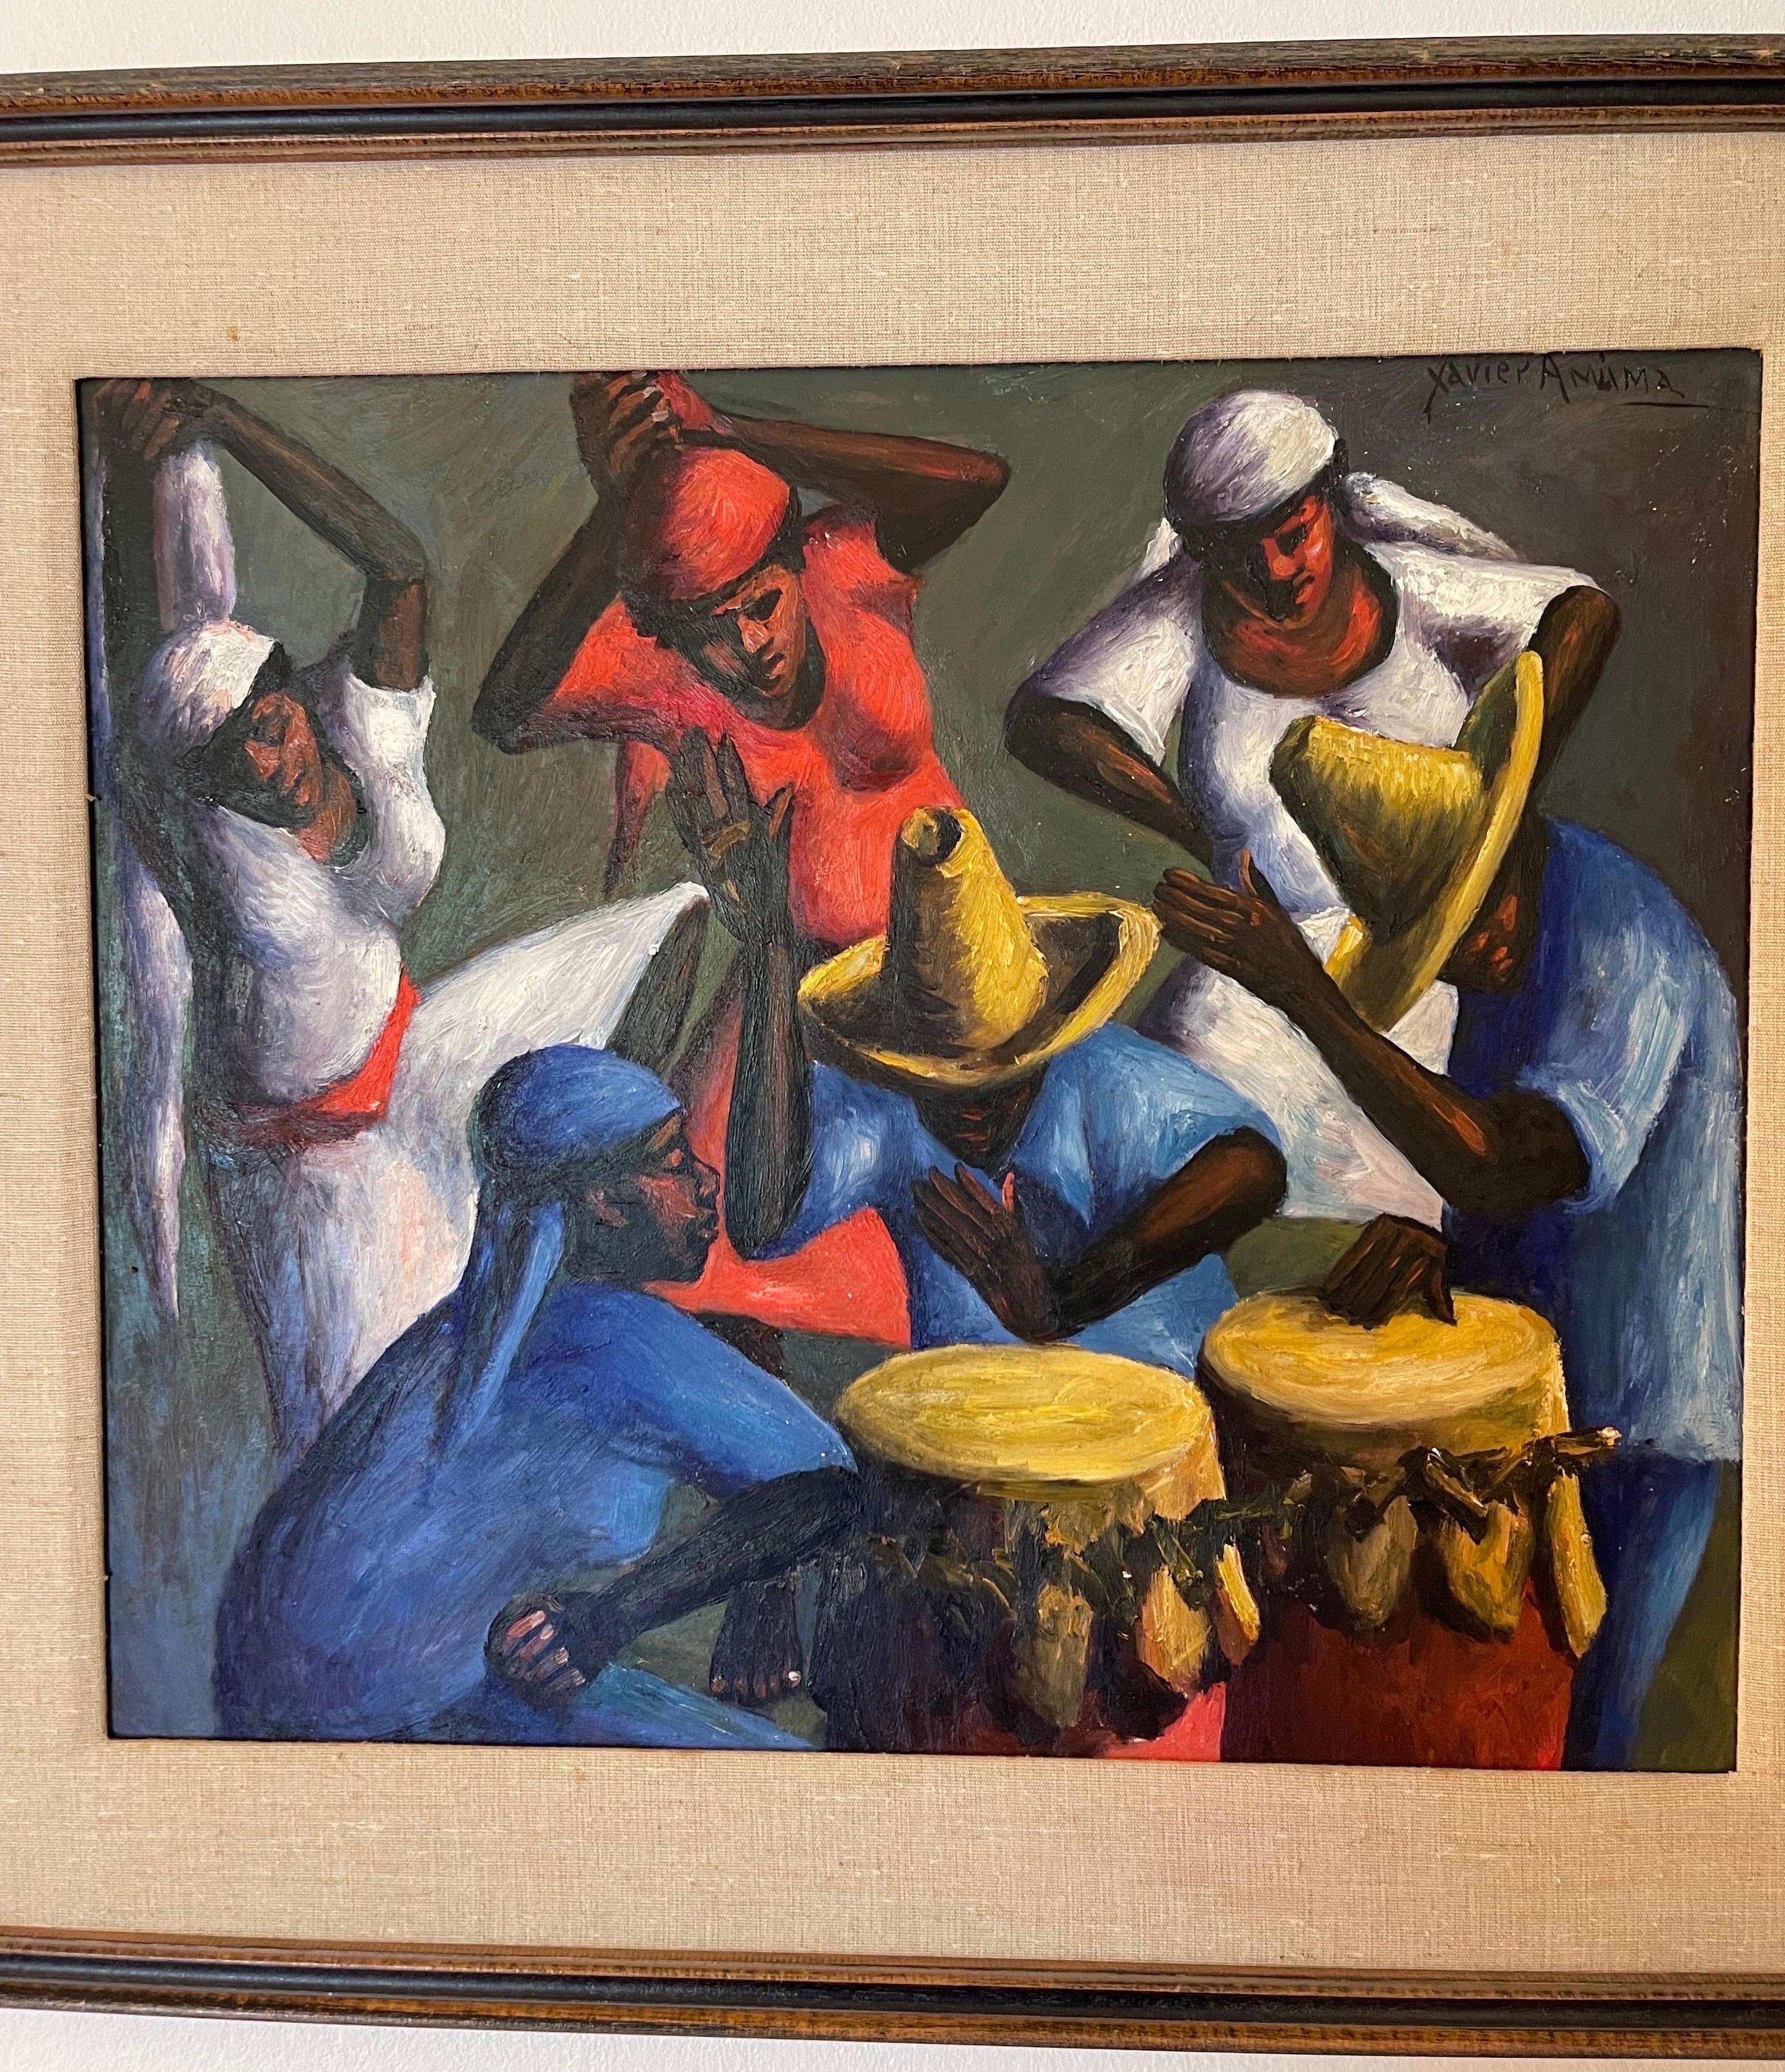 Painted 1956 Haiti Drummers and Dancers by Xaviar Amiana Painting For Sale